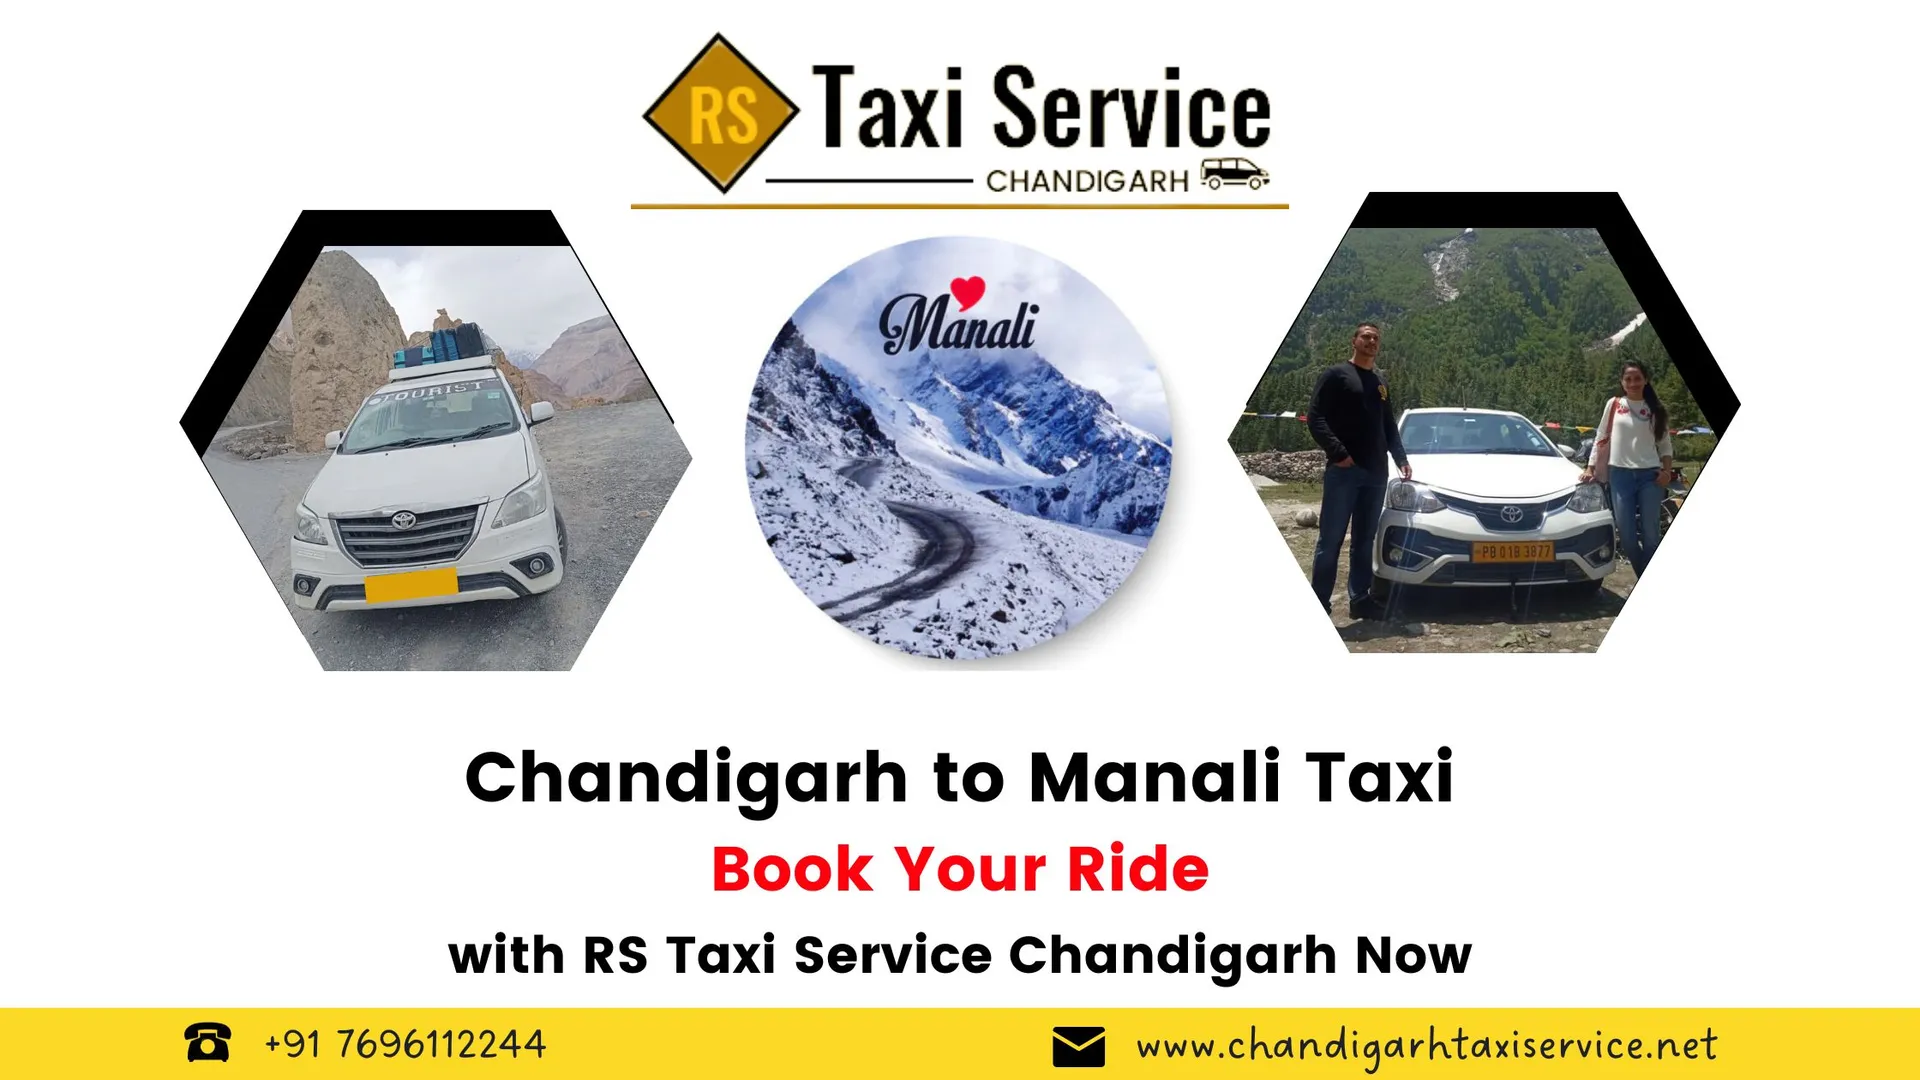 Discover seamless and comfortable travel with RS Taxi Service from Chandigarh to Manali. Our premium taxi service offers a remarkable journey through picturesque landscapes. Whether it's a serene family vacation or an adventurous trip with friends, we ensure a safe and enjoyable ride. 

Experience top-notch convenience as our skilled drivers navigate the route with expertise, while our well-maintained fleet guarantees reliability. https://www.chandigarhtaxiservice.net/chandigarh-manali-taxi